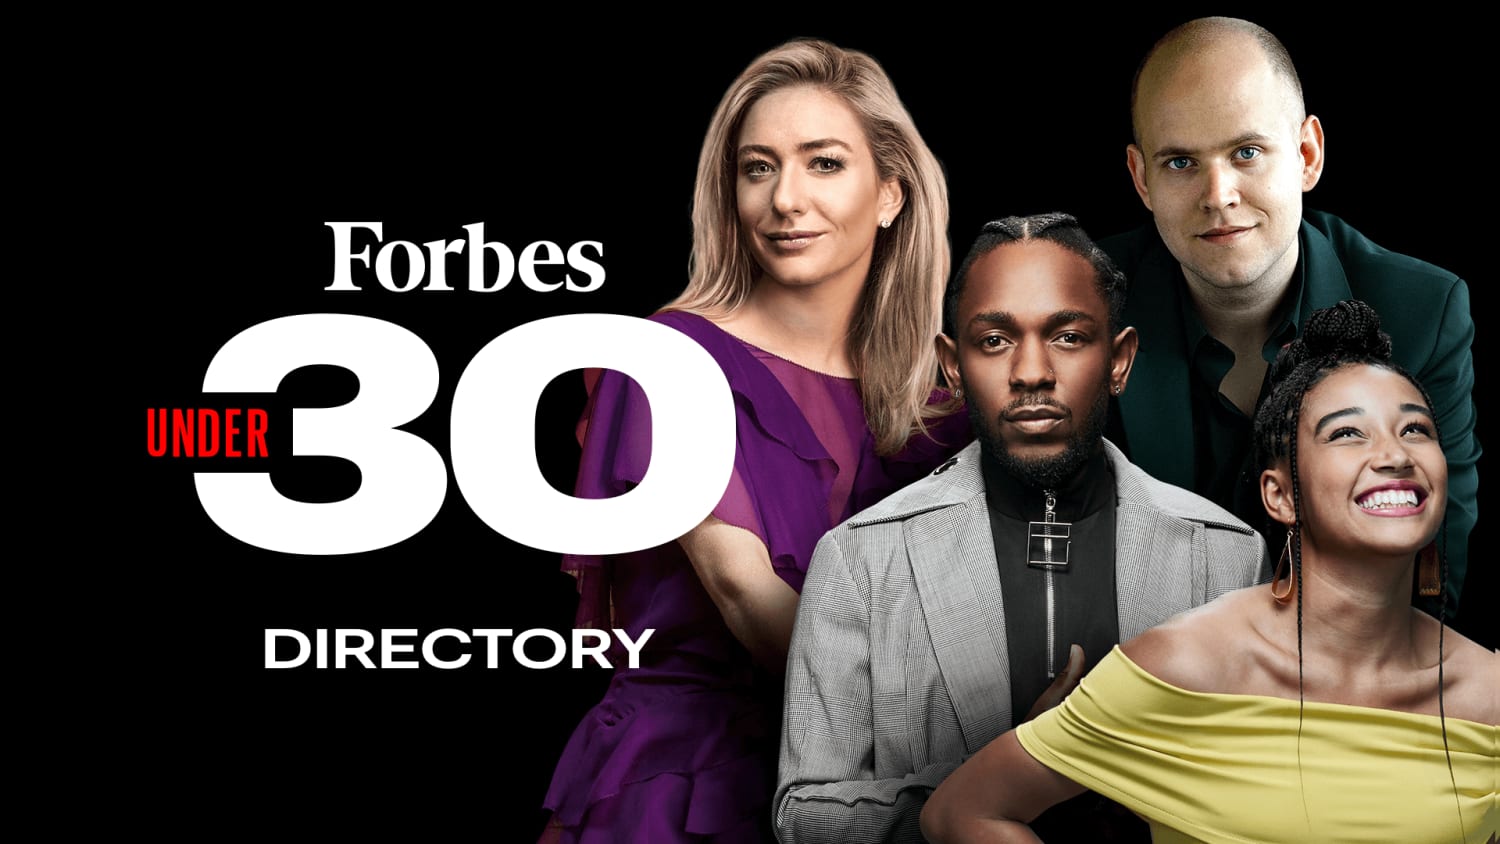 Forbes 30 Under 30 Directory